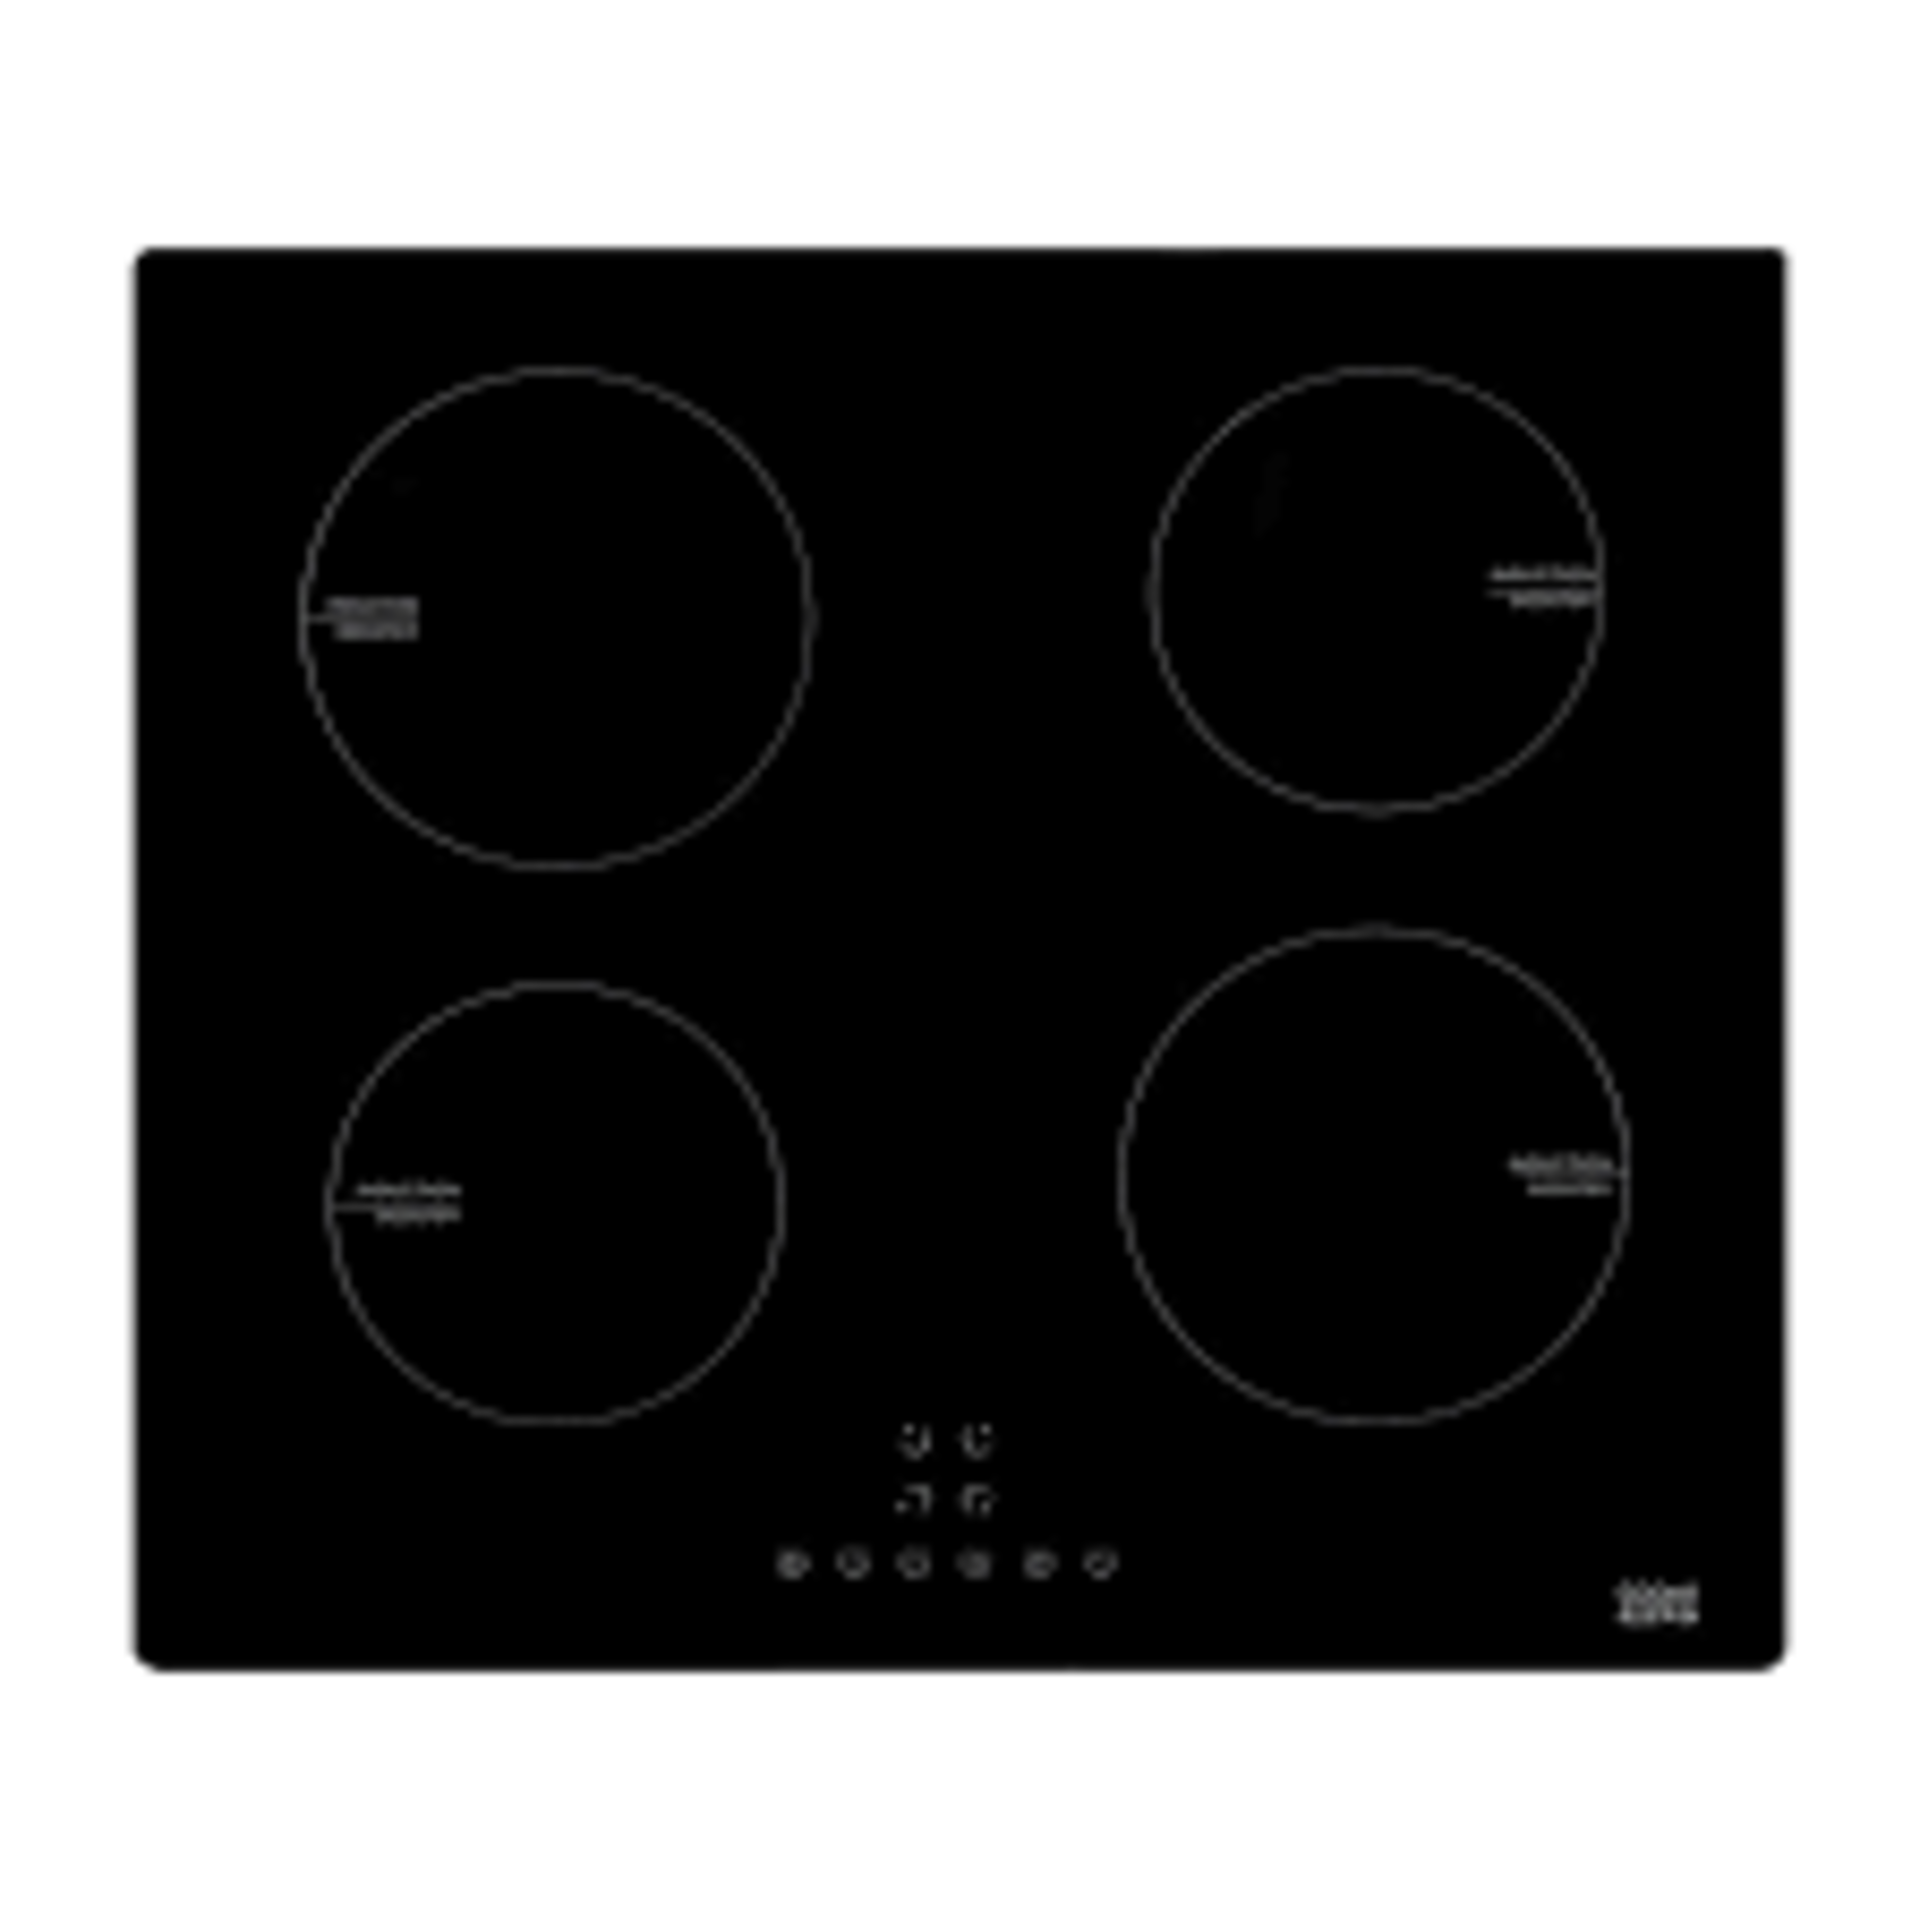 Cooke & Lewis CLIND60 59cm Induction Hob - Black. - ER47. This Glass induction hob is stylish and